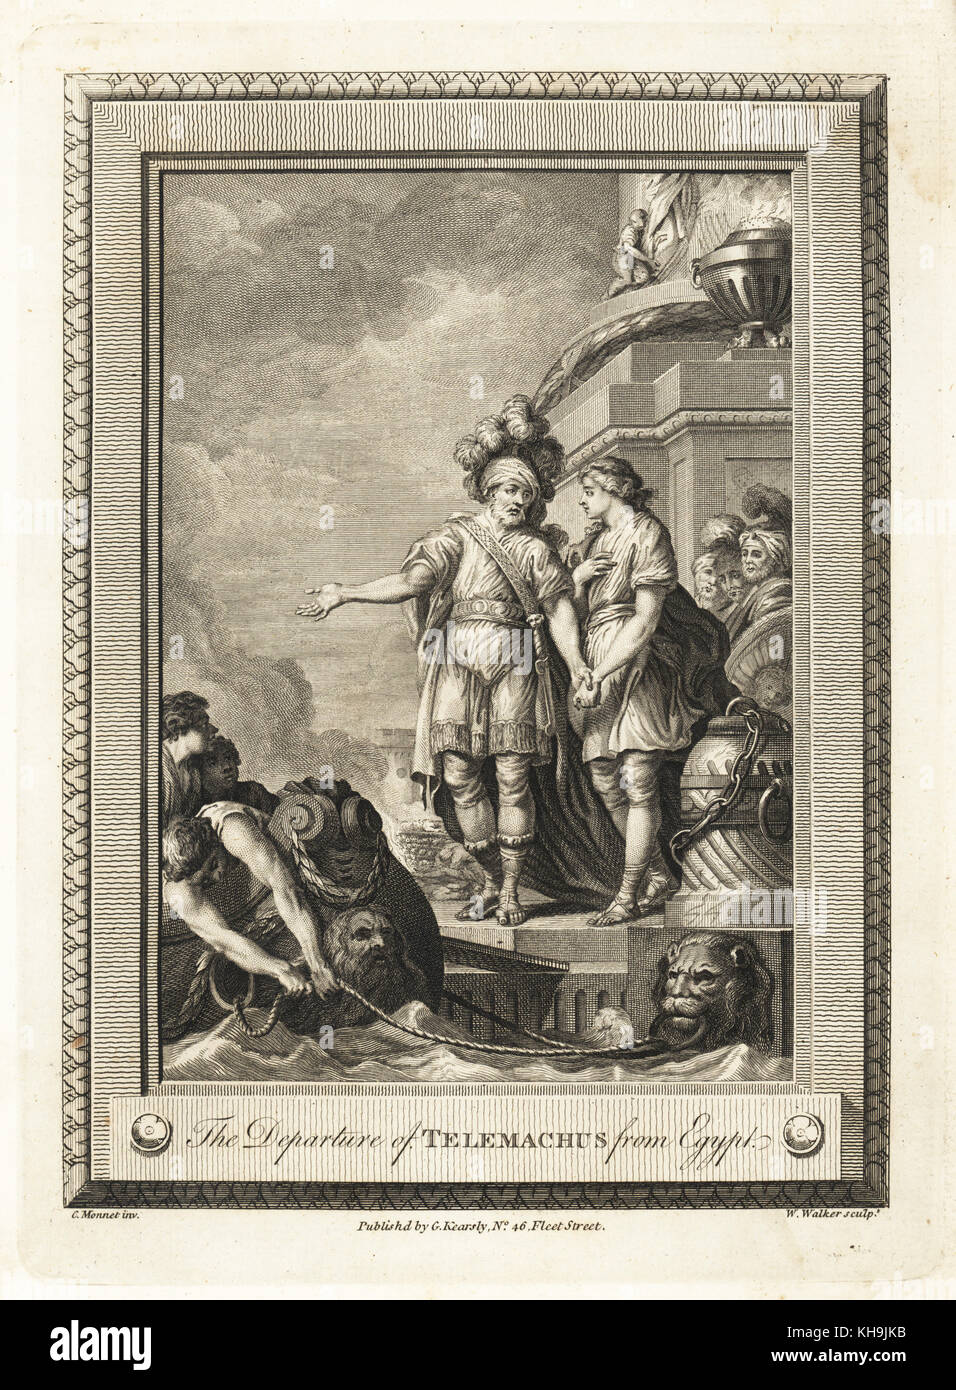 The departure of Telemachus from Egypt. Copperplate engraving by W. Walker after an illustration by C. Monnet from The Copper Plate Magazine or Monthly Treasure, G. Kearsley, London, 1778. Stock Photo